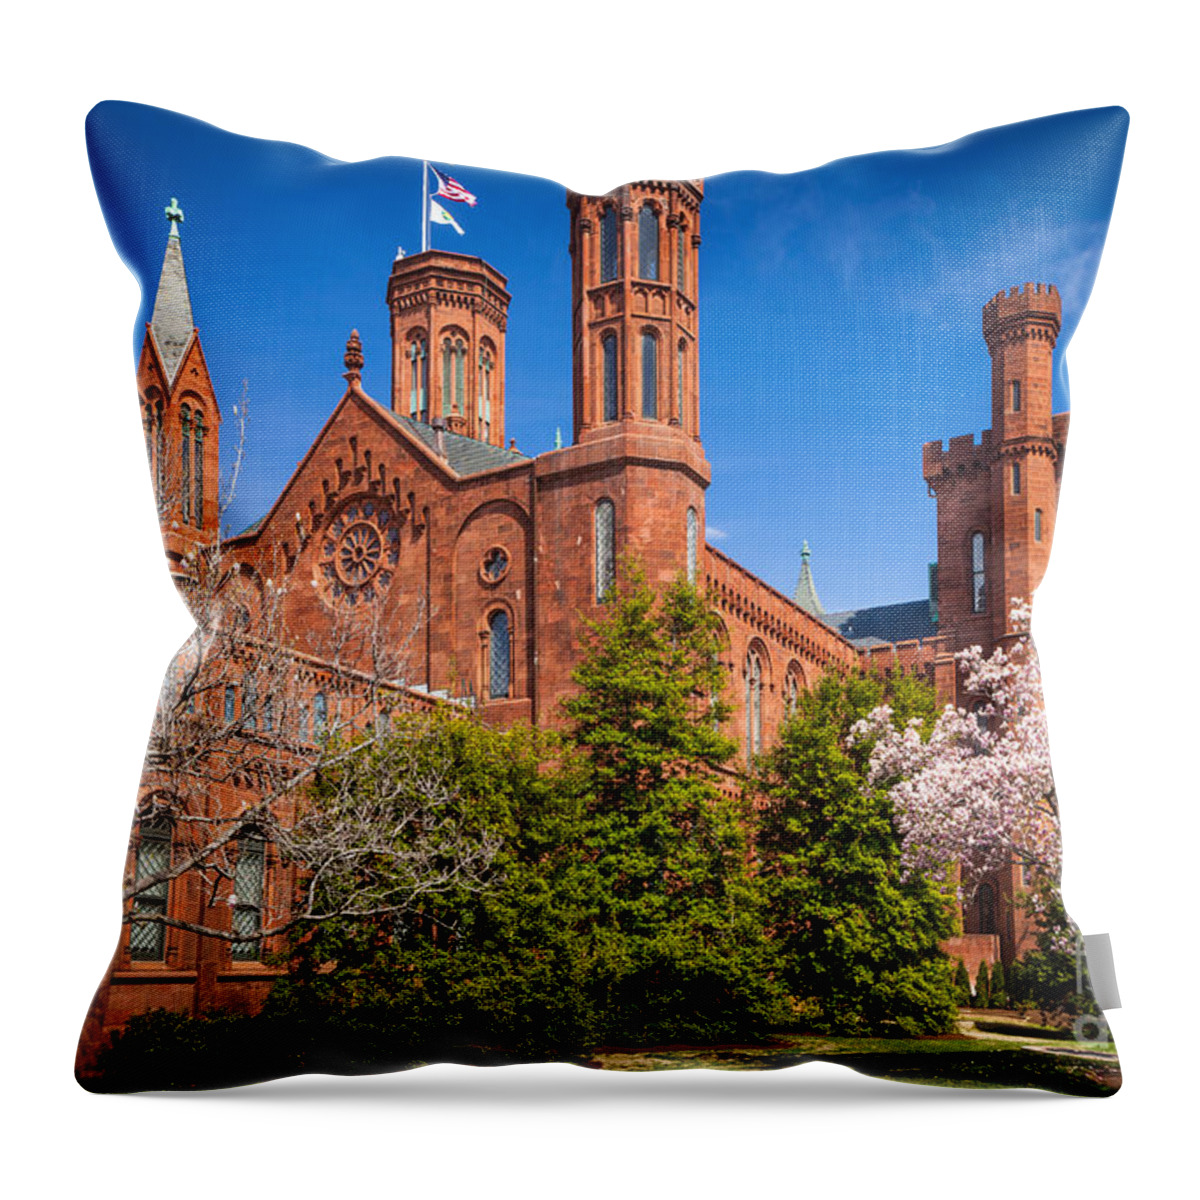 America Throw Pillow featuring the photograph Smithsonian Castle Wall by Inge Johnsson